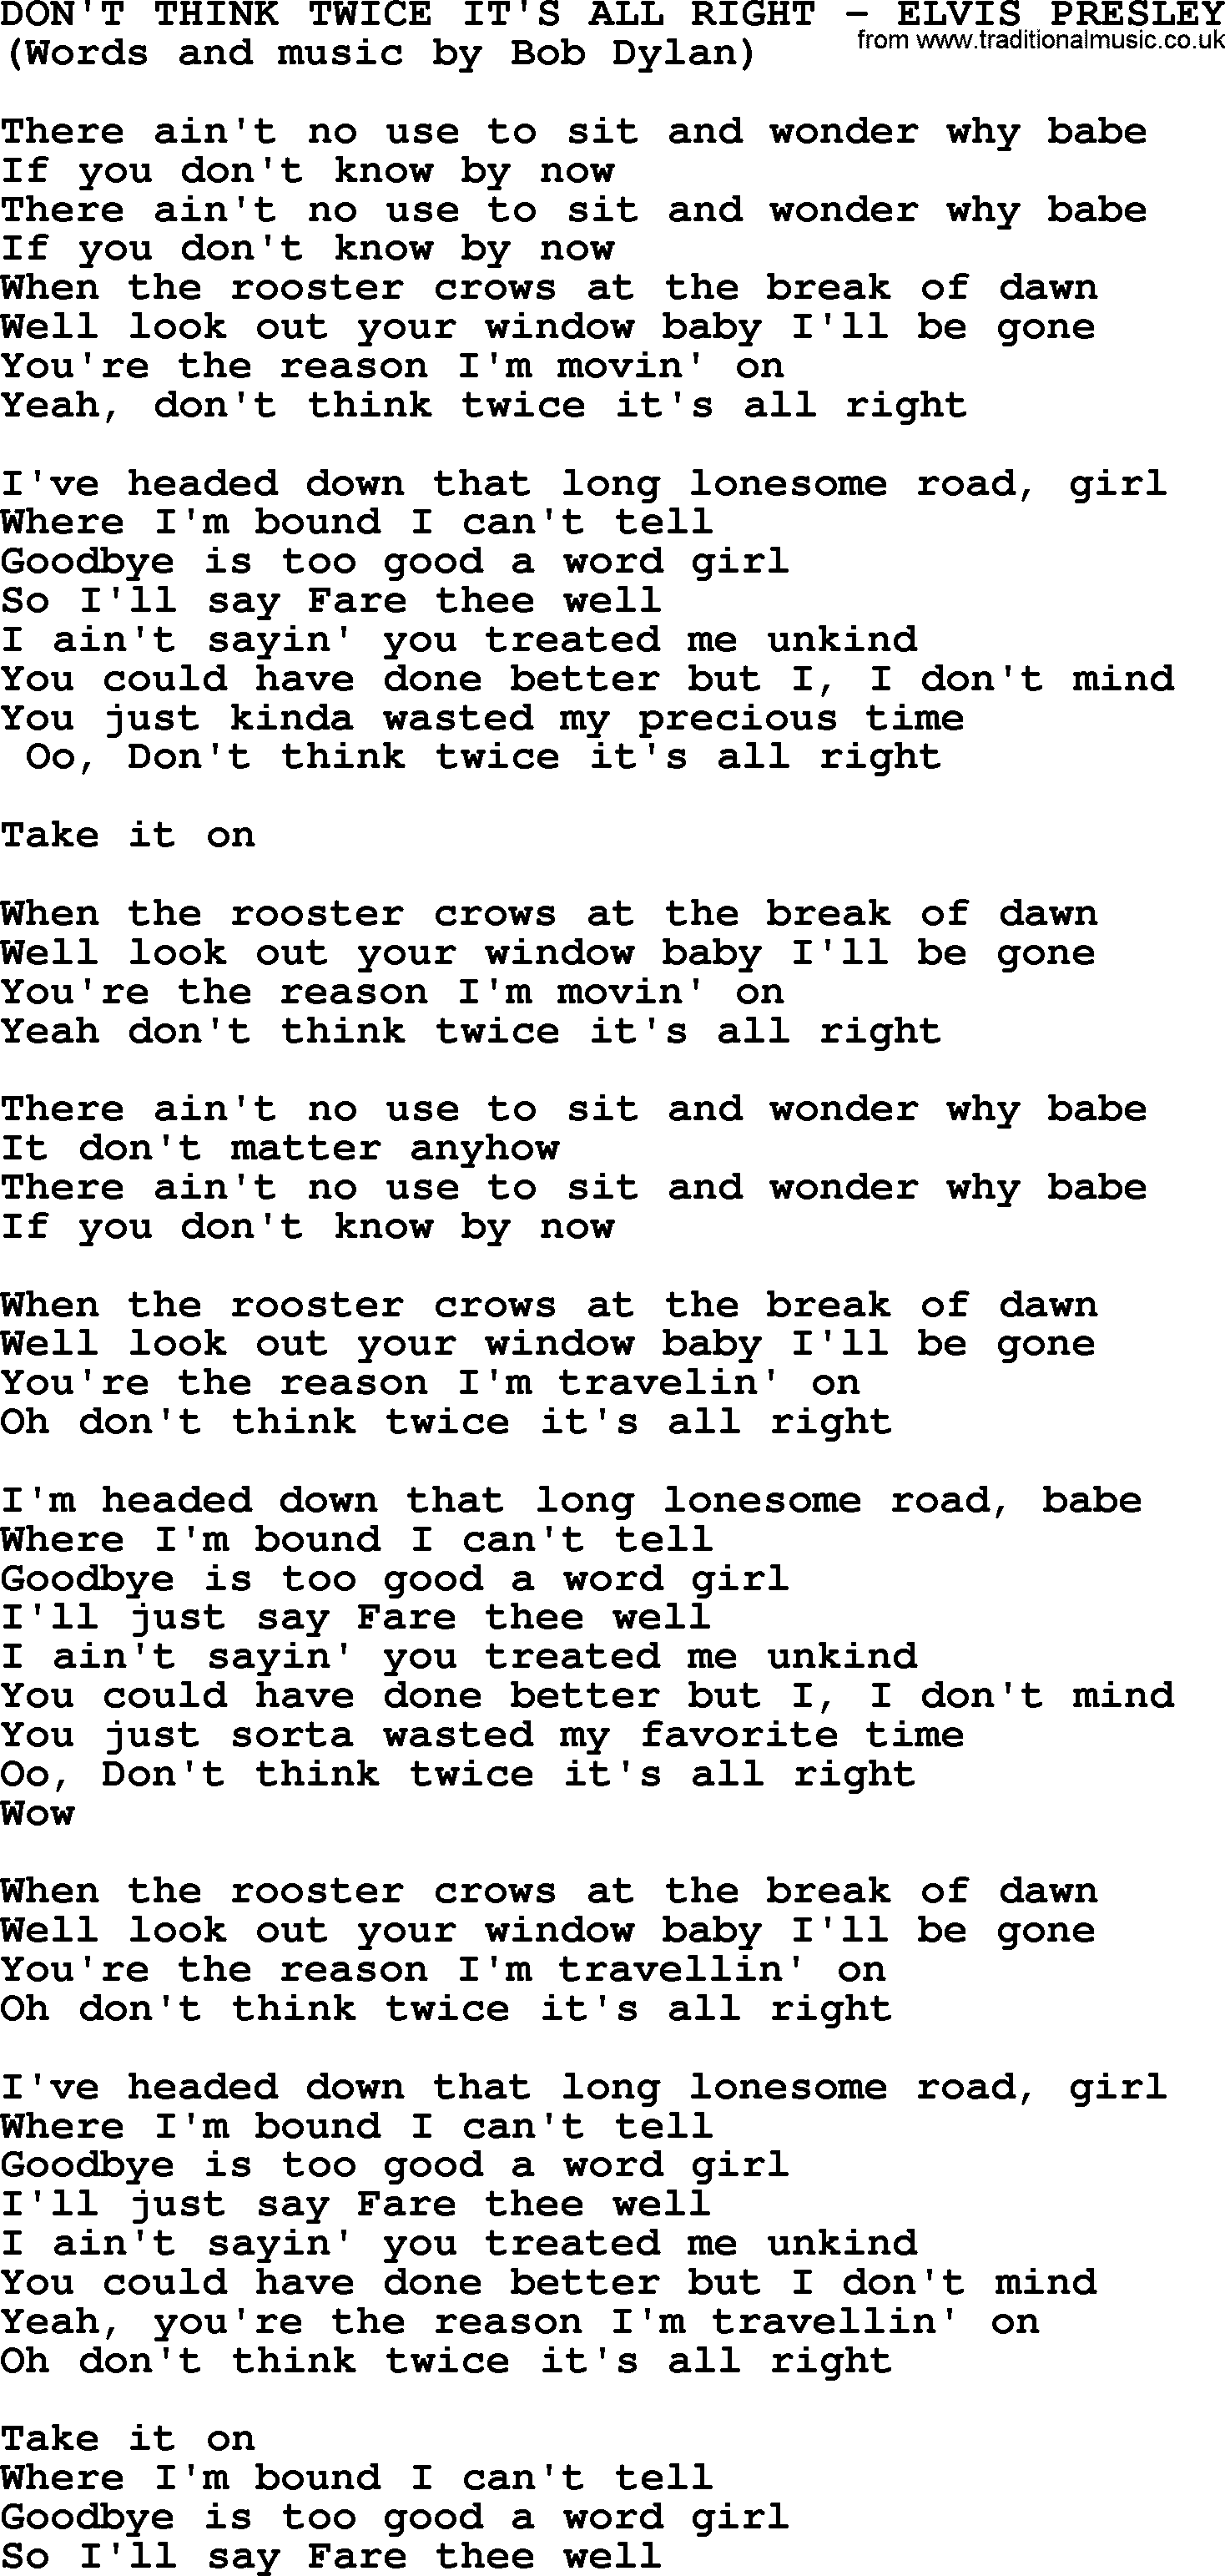 Elvis Presley song: Don't Think Twice It's All Right lyrics